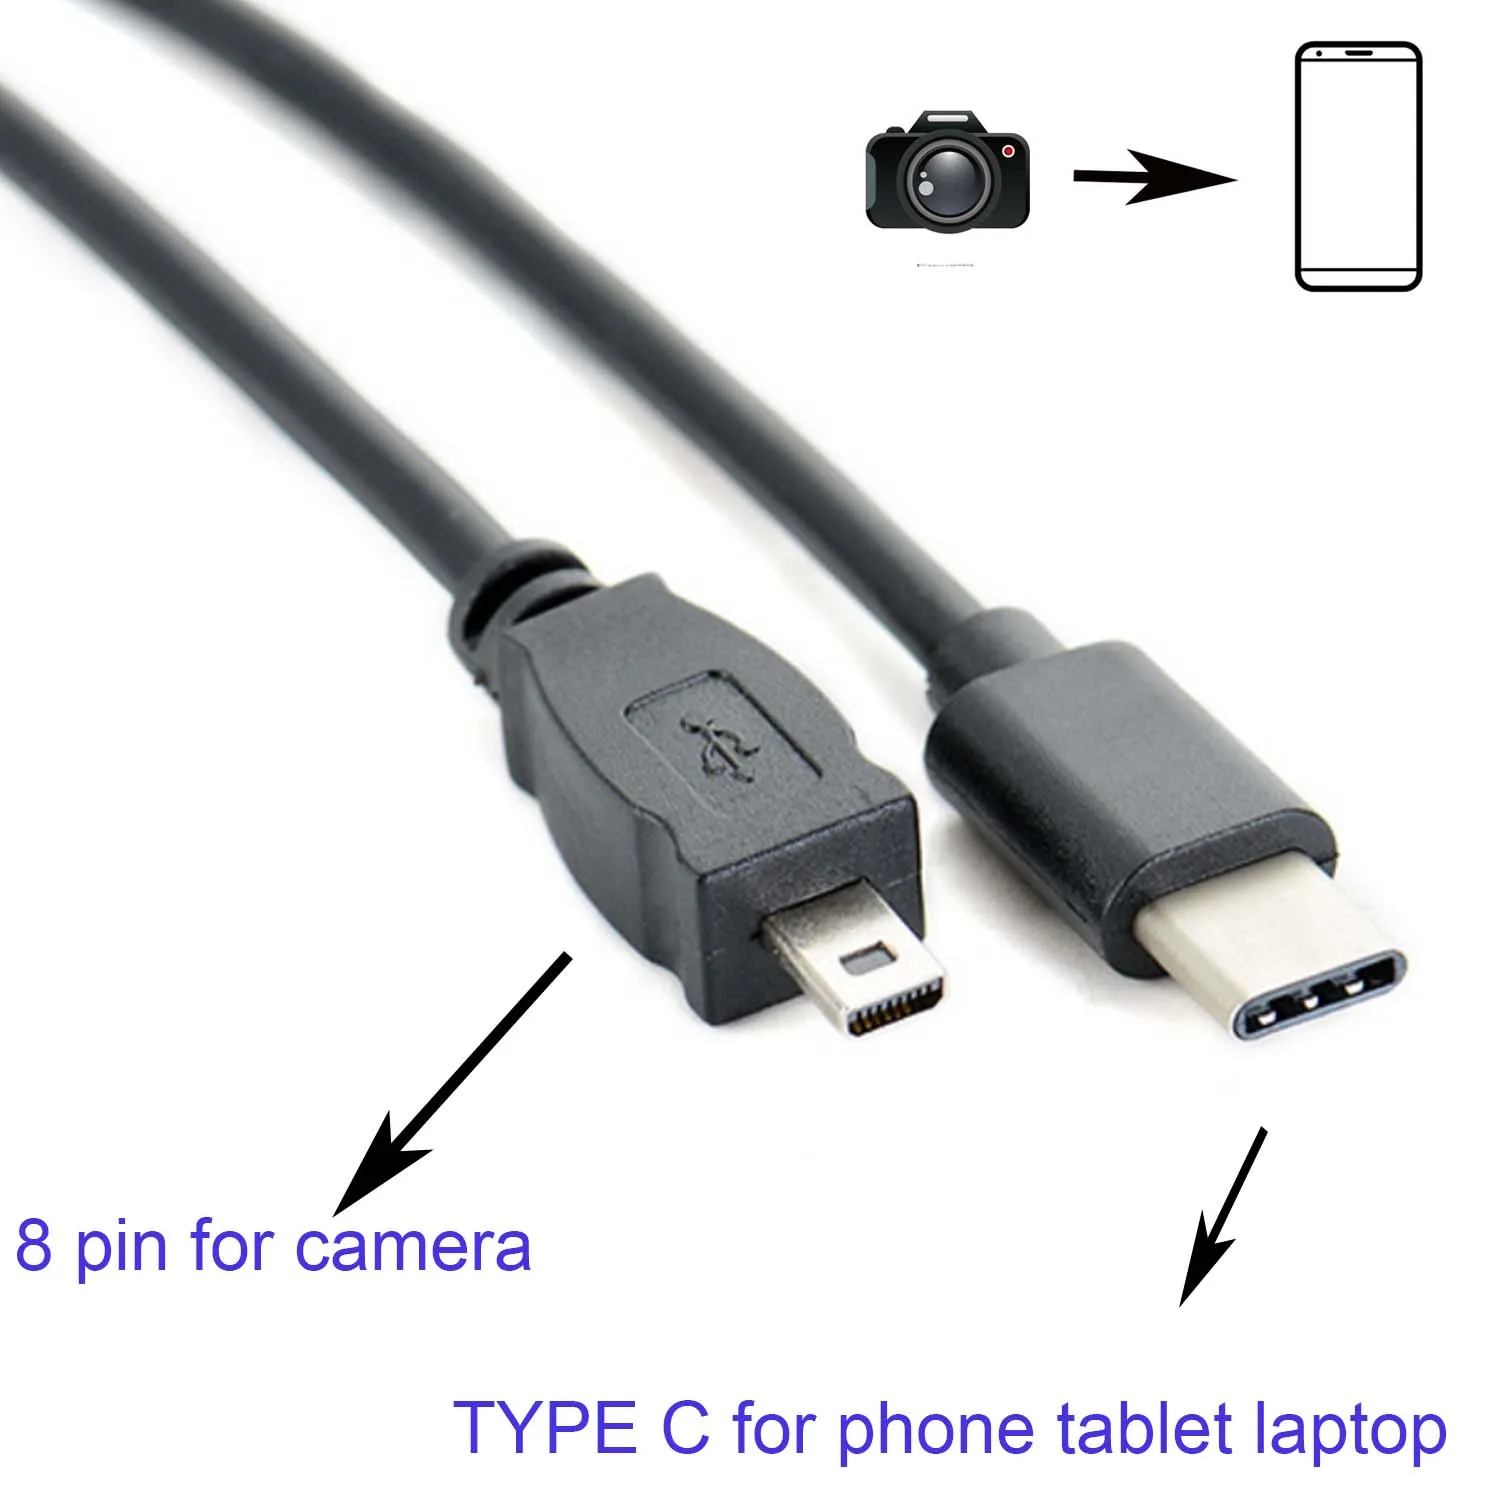 

TYPE C OTG CABLE FOR Olympus CB-USB7 Ex-Pro D-725 730 Mju-1070 5000 7010 7020 camera to phone edit picture video